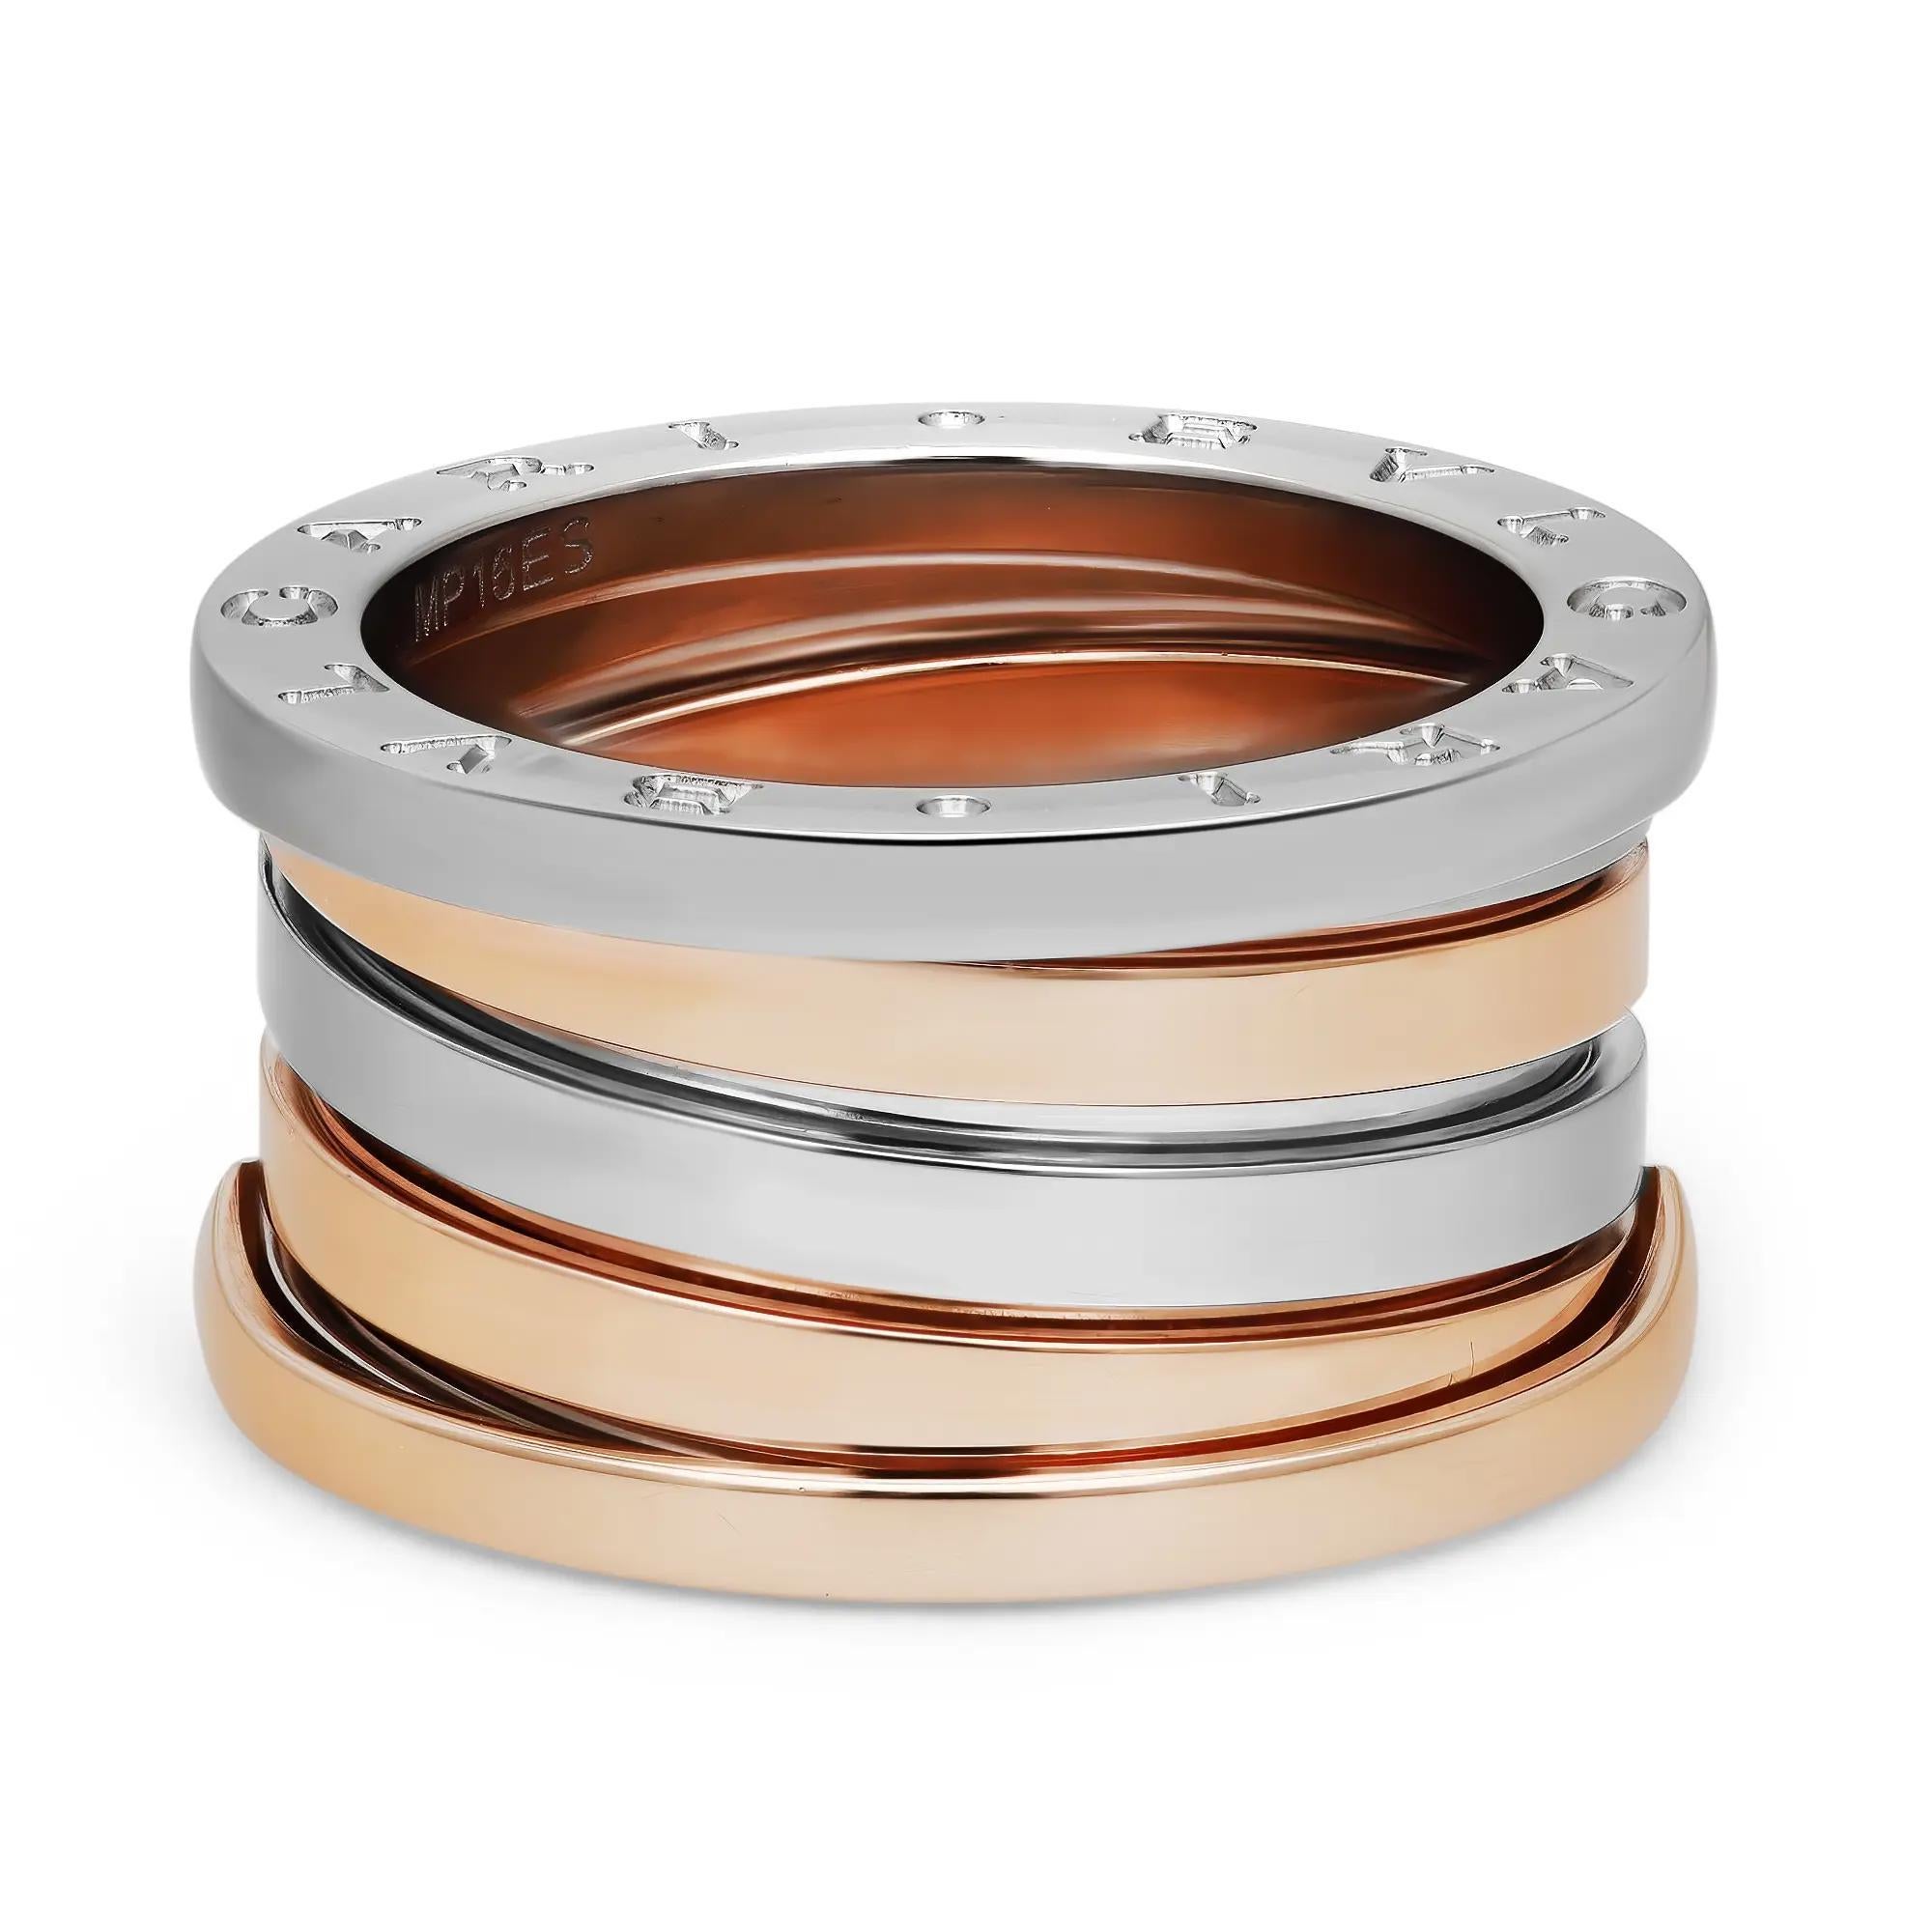 From the Bvlgari B.zero1 collection, this beautiful four-band multi-color gold ring is crafted in a lustrous 18K white gold and rose gold. It features a distinctive four-band spiral ring with pavé set round brilliant cut diamonds on the rims with